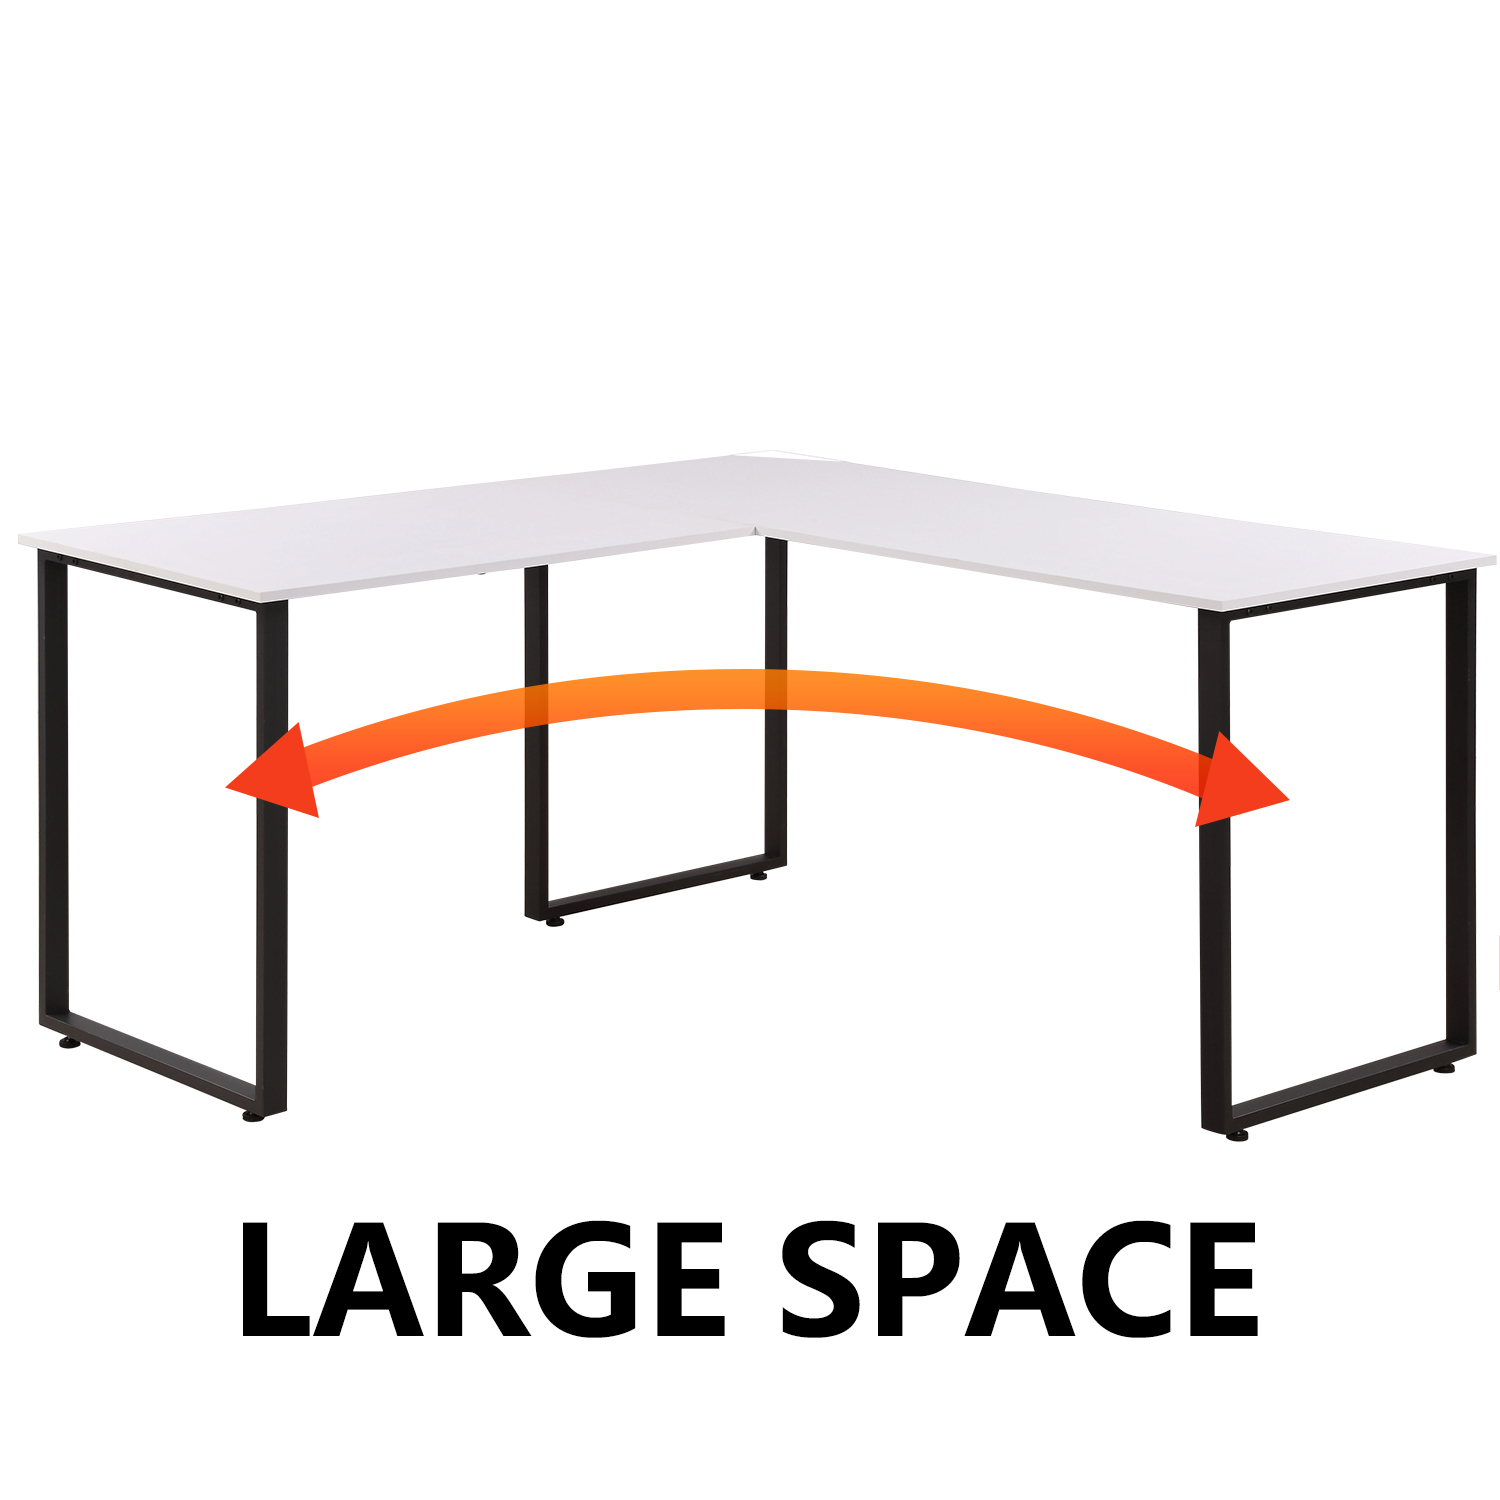 enyopro Home Office Computer Desk, 58’’ L-Shaped Corner Desk with 0.7" Thicker Tabletop, Space-Saving Workstation Table for Office Home Apartment, Sturdy Metal Frame Corner Gaming Study Table, B2257 - image 2 of 8